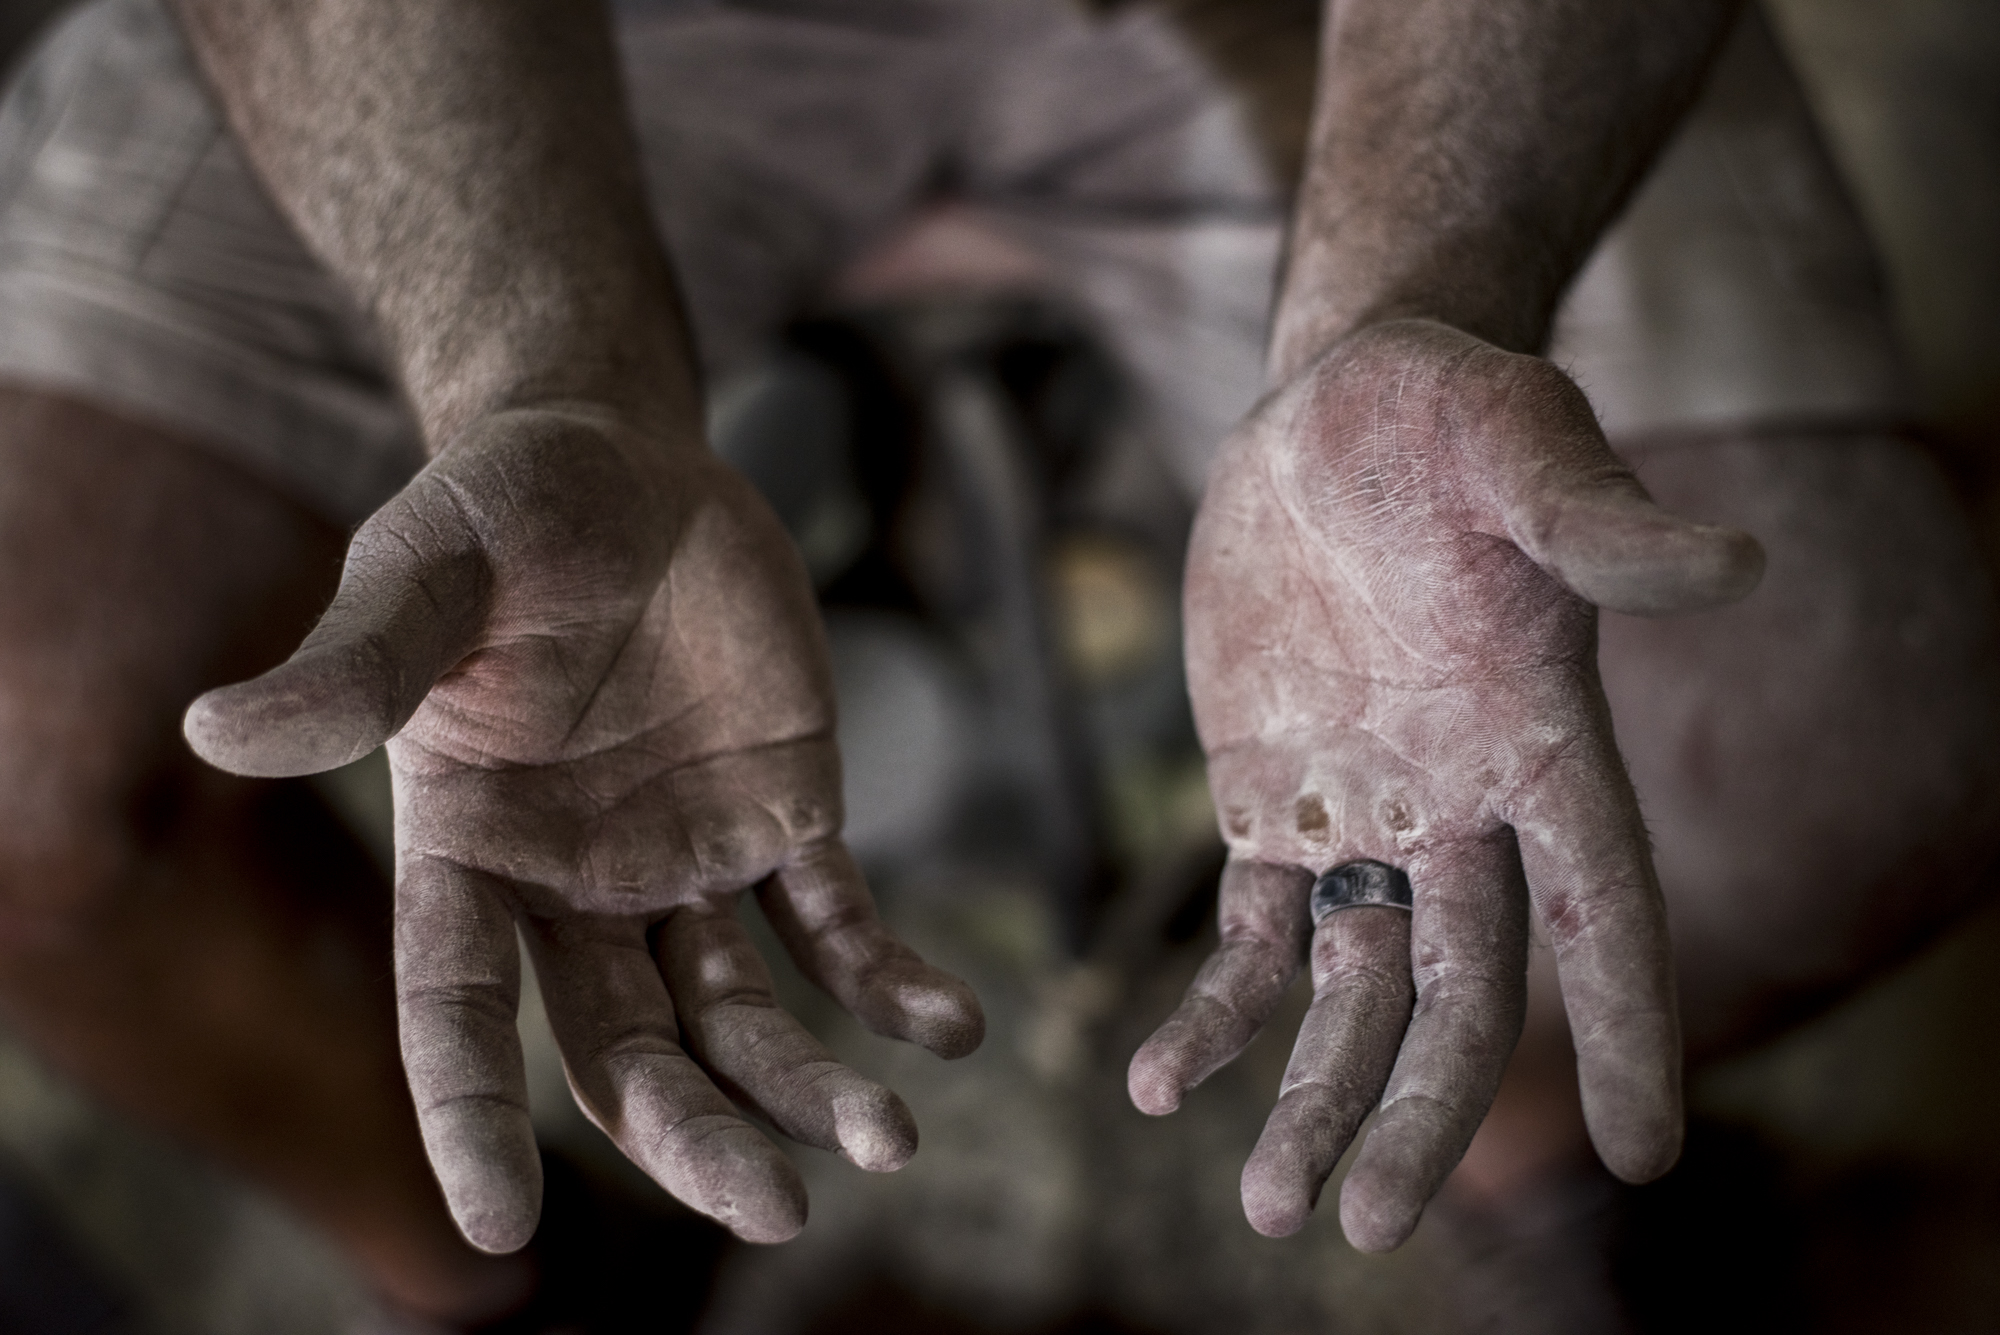  Tim Dailey holds out his hands after working on a car in his dad’s auto body shop in Cynthiana, Kentucky.  